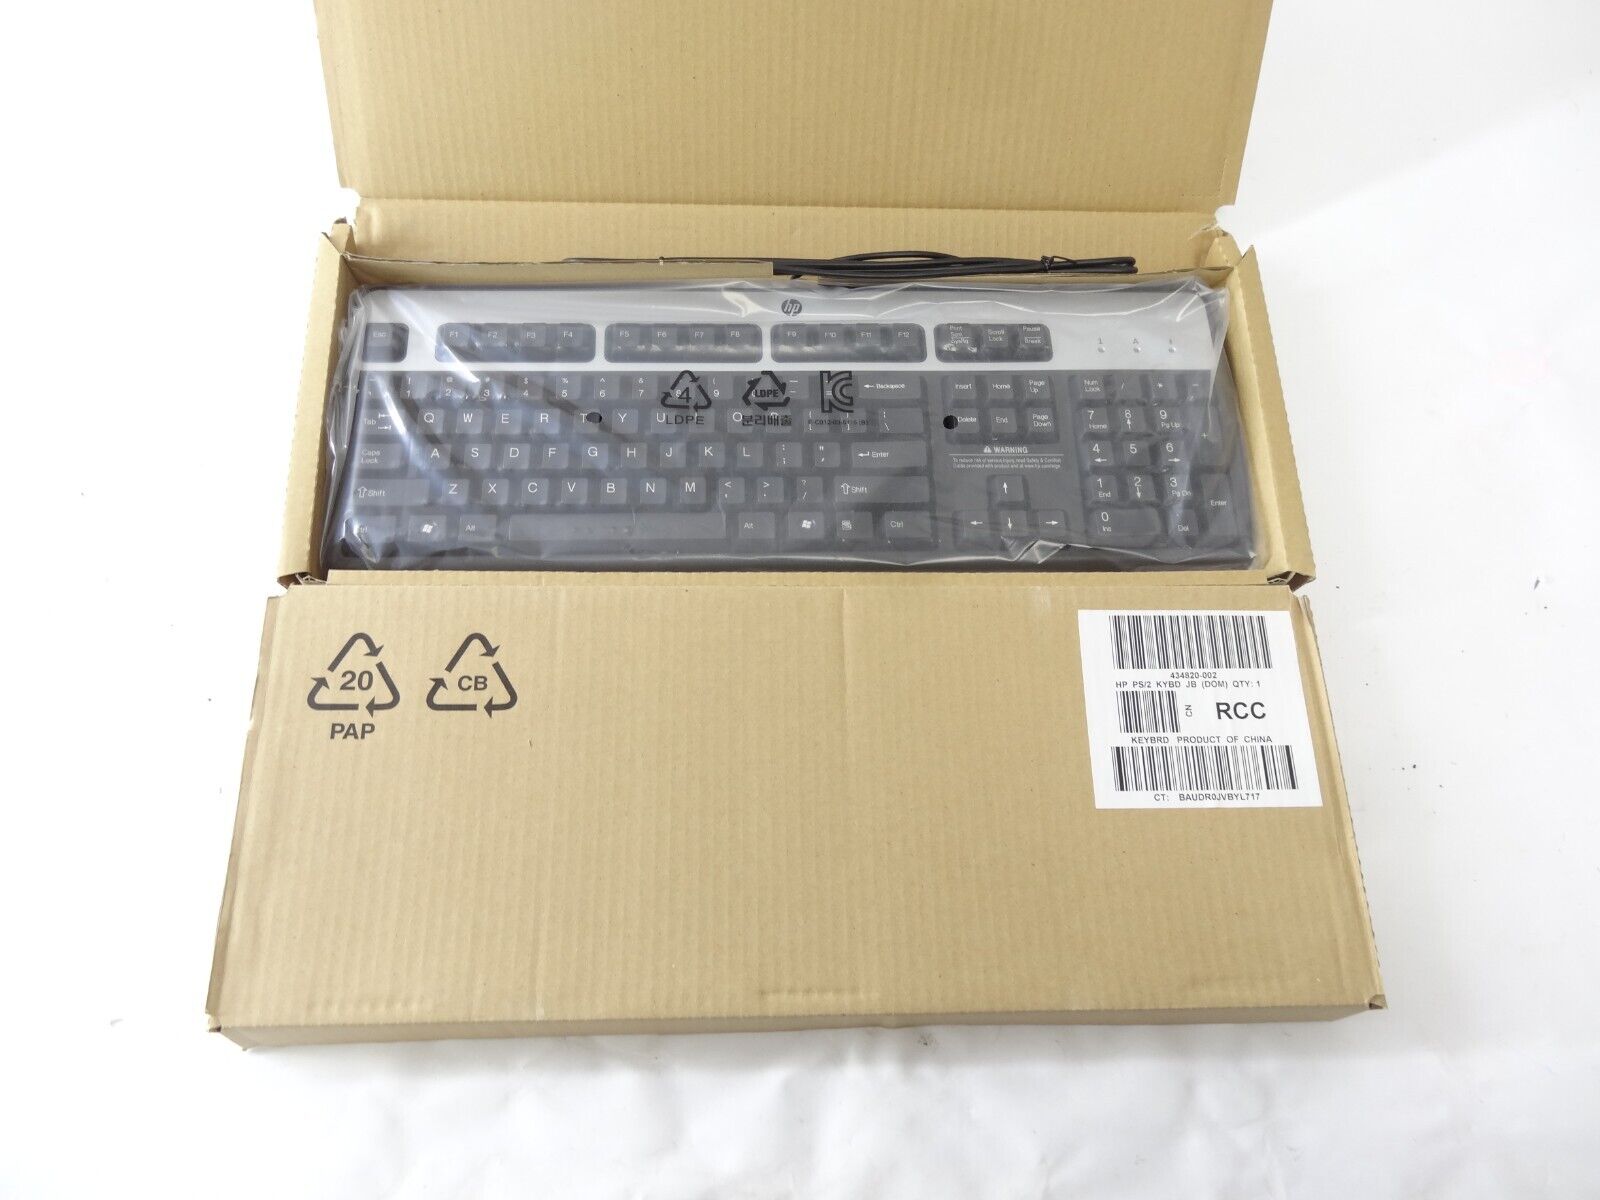 Pair of 2 New In Box HP PS/2 Keyboards 434820-002